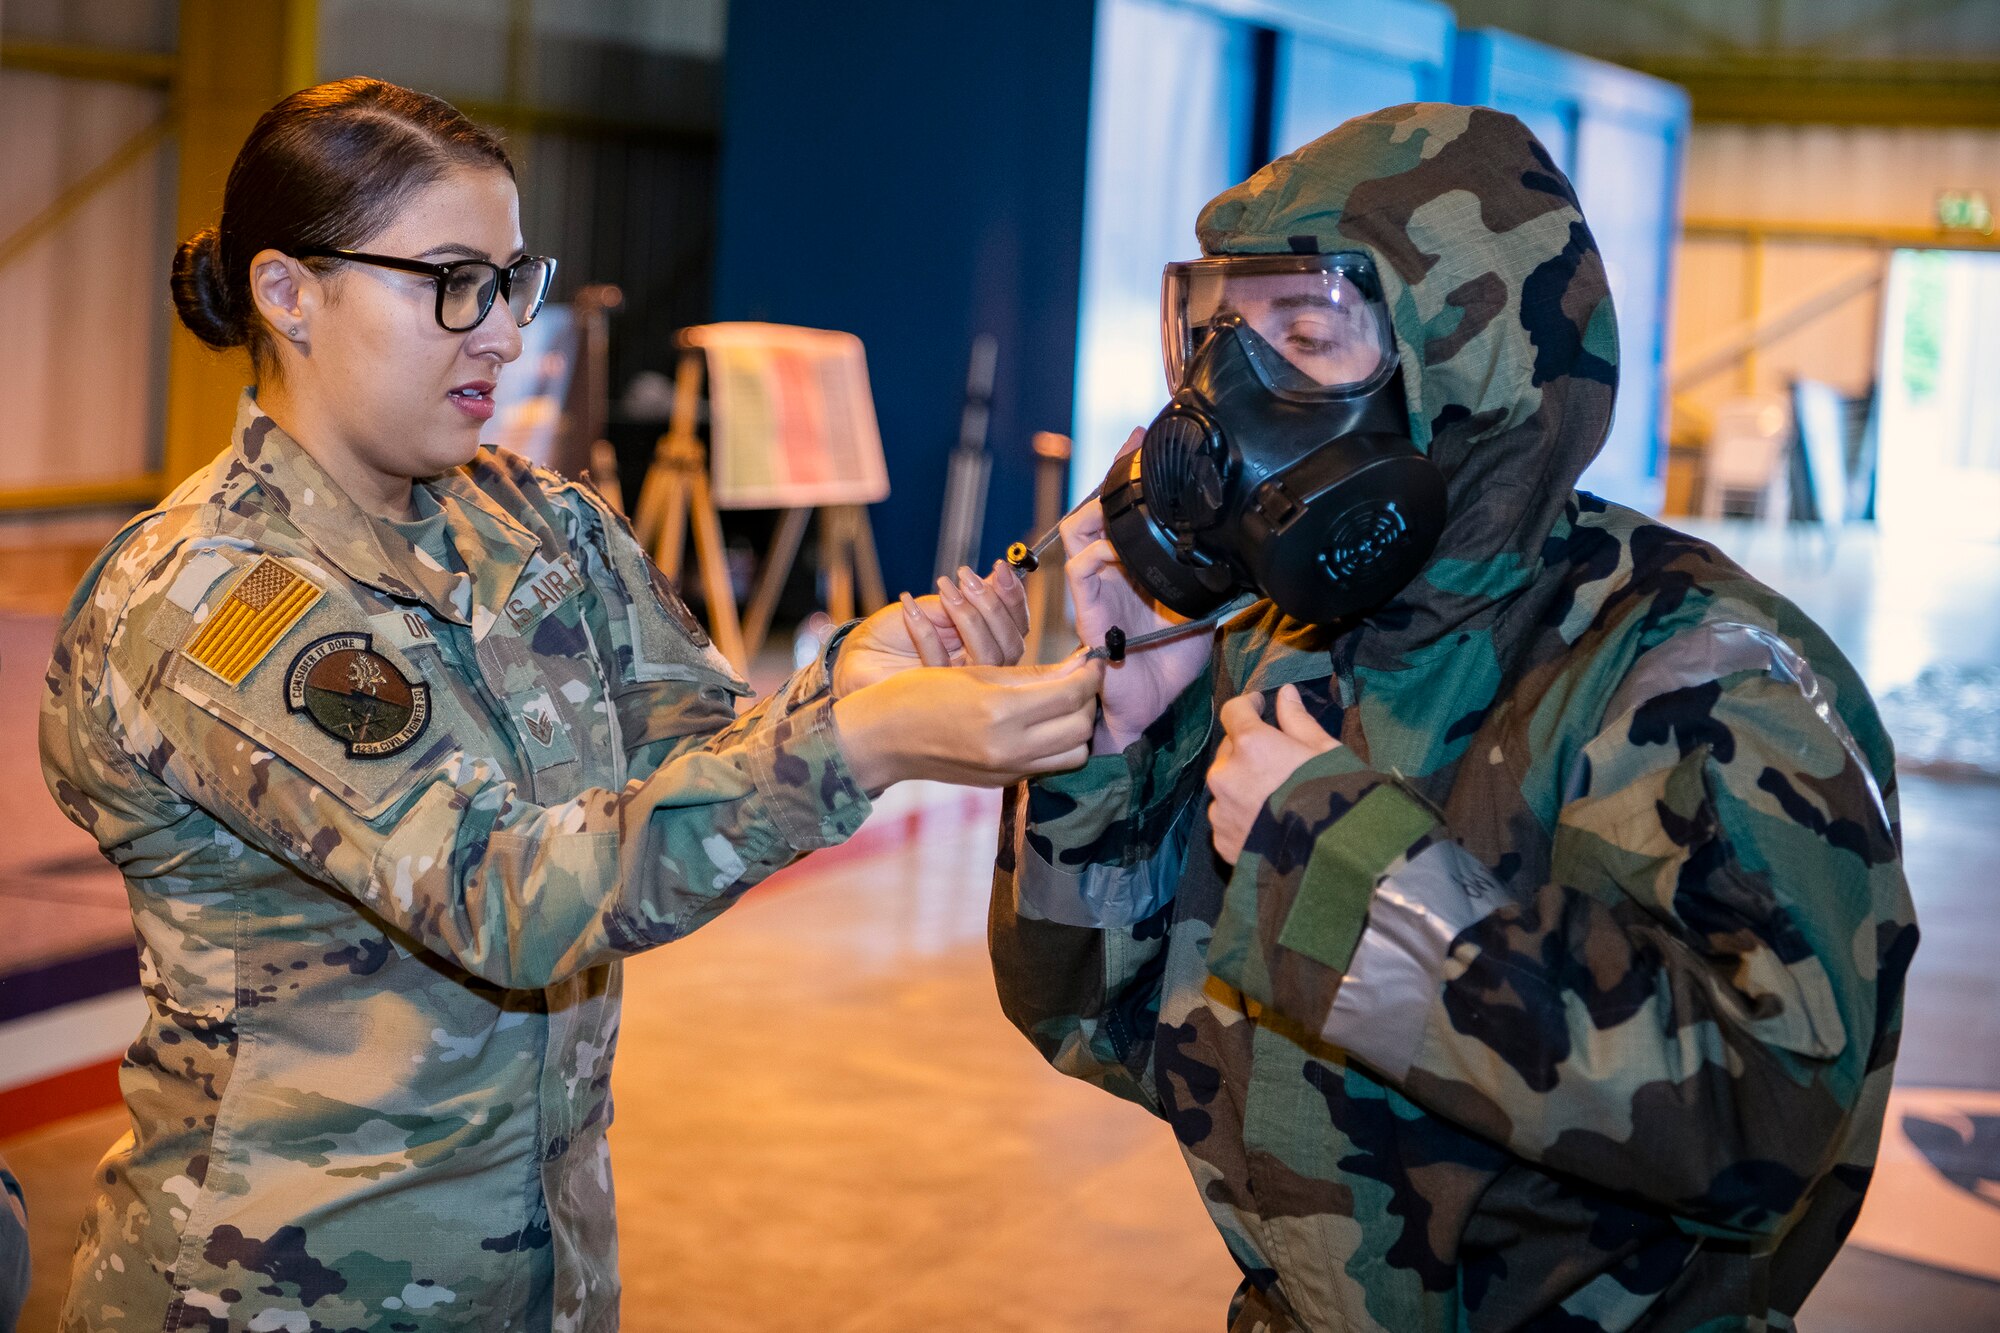 U.S. Air Force Staff Sgt. Ashley Ortiz, left,  423d Civil Engineer Squadron emergency management NCO in charge of plans and operations, assists Maj. Erica Balfour, 423d Communications Squadron commander, with her Mission Oriented Protective Posture gear during Ability to Survive and Operate training at RAF Alconbury, England, Aug. 27, 2021. Airmen from the 501st Combat Support Wing participated in the ATSO rodeo to get a refresher on how to properly utilize their MOPP gear in a potential chemical environment. (U.S. Air Force photo by Senior Airman Eugene Oliver)